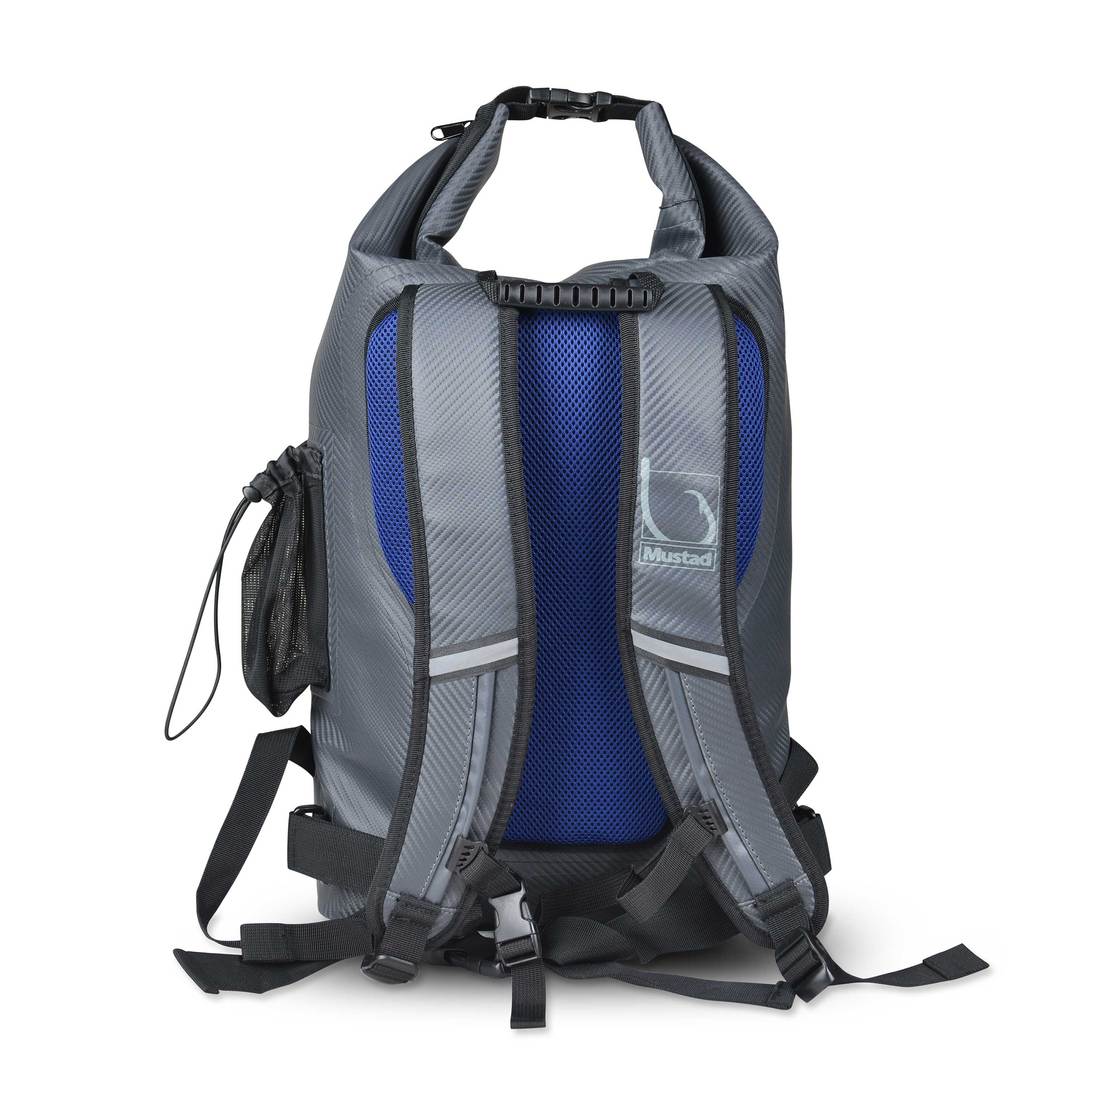 MUSTAD MB010 DRY BACKPACK 30L